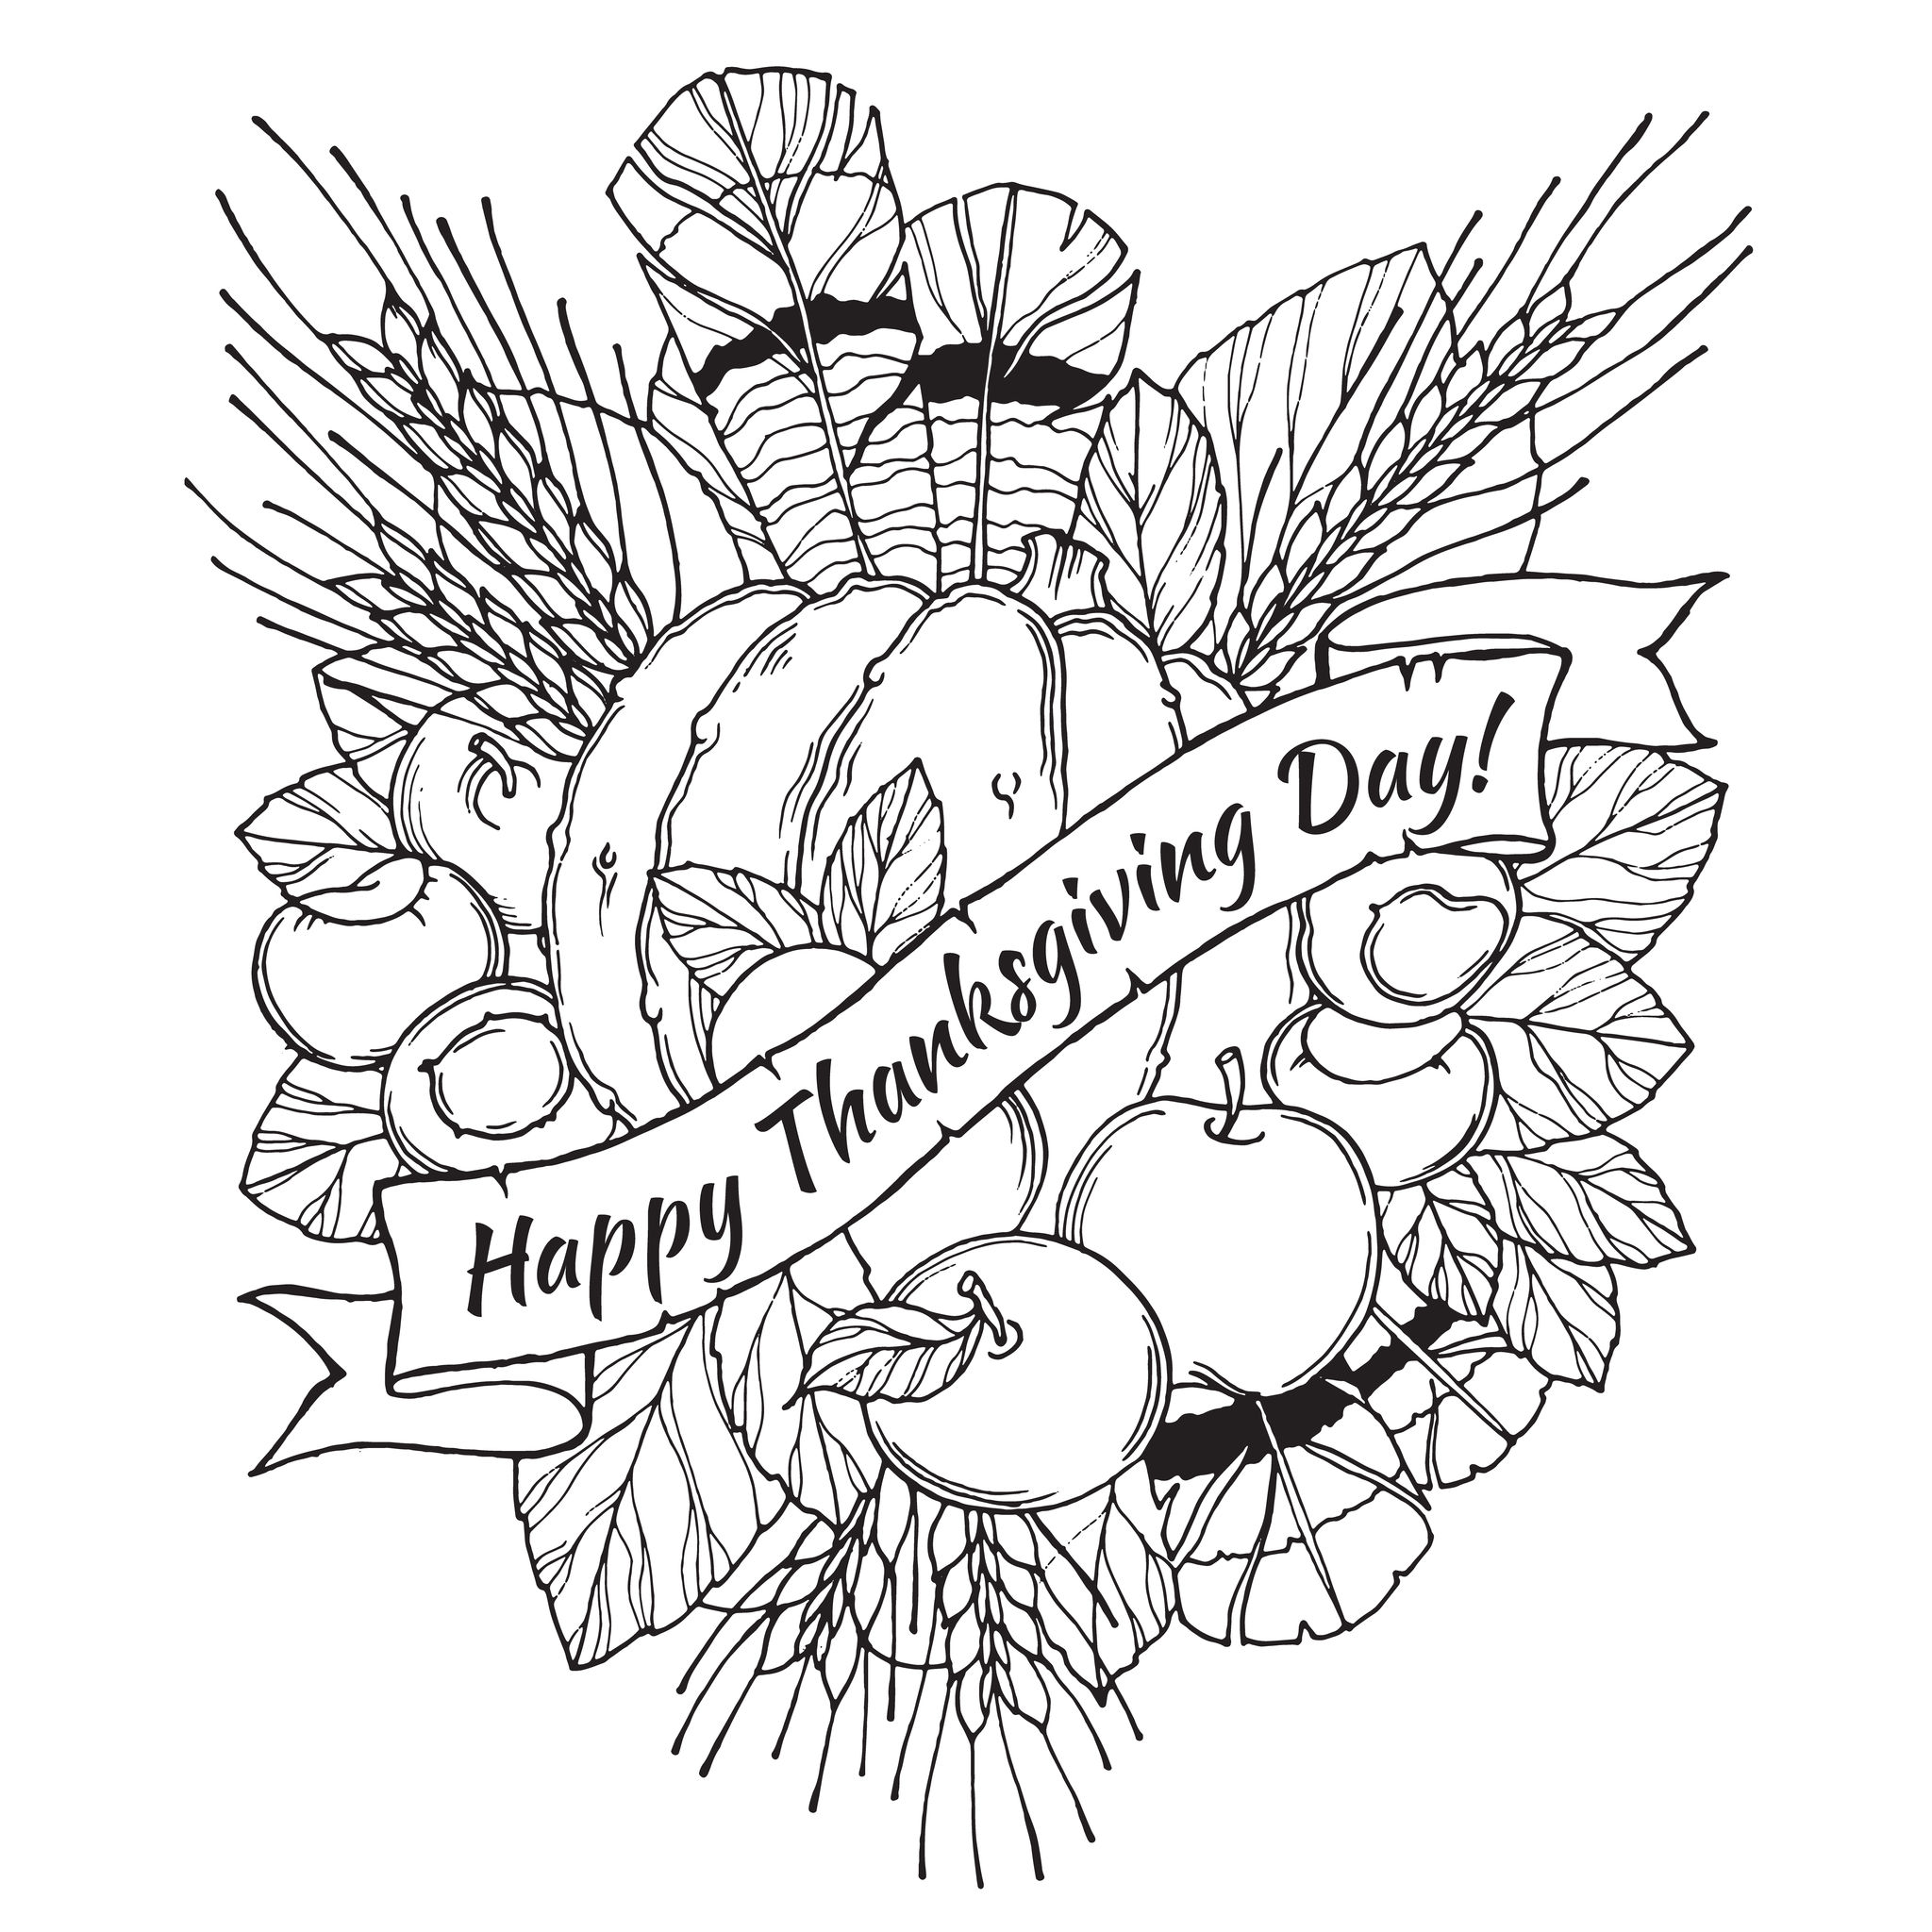 Your creations You have colored this coloring page